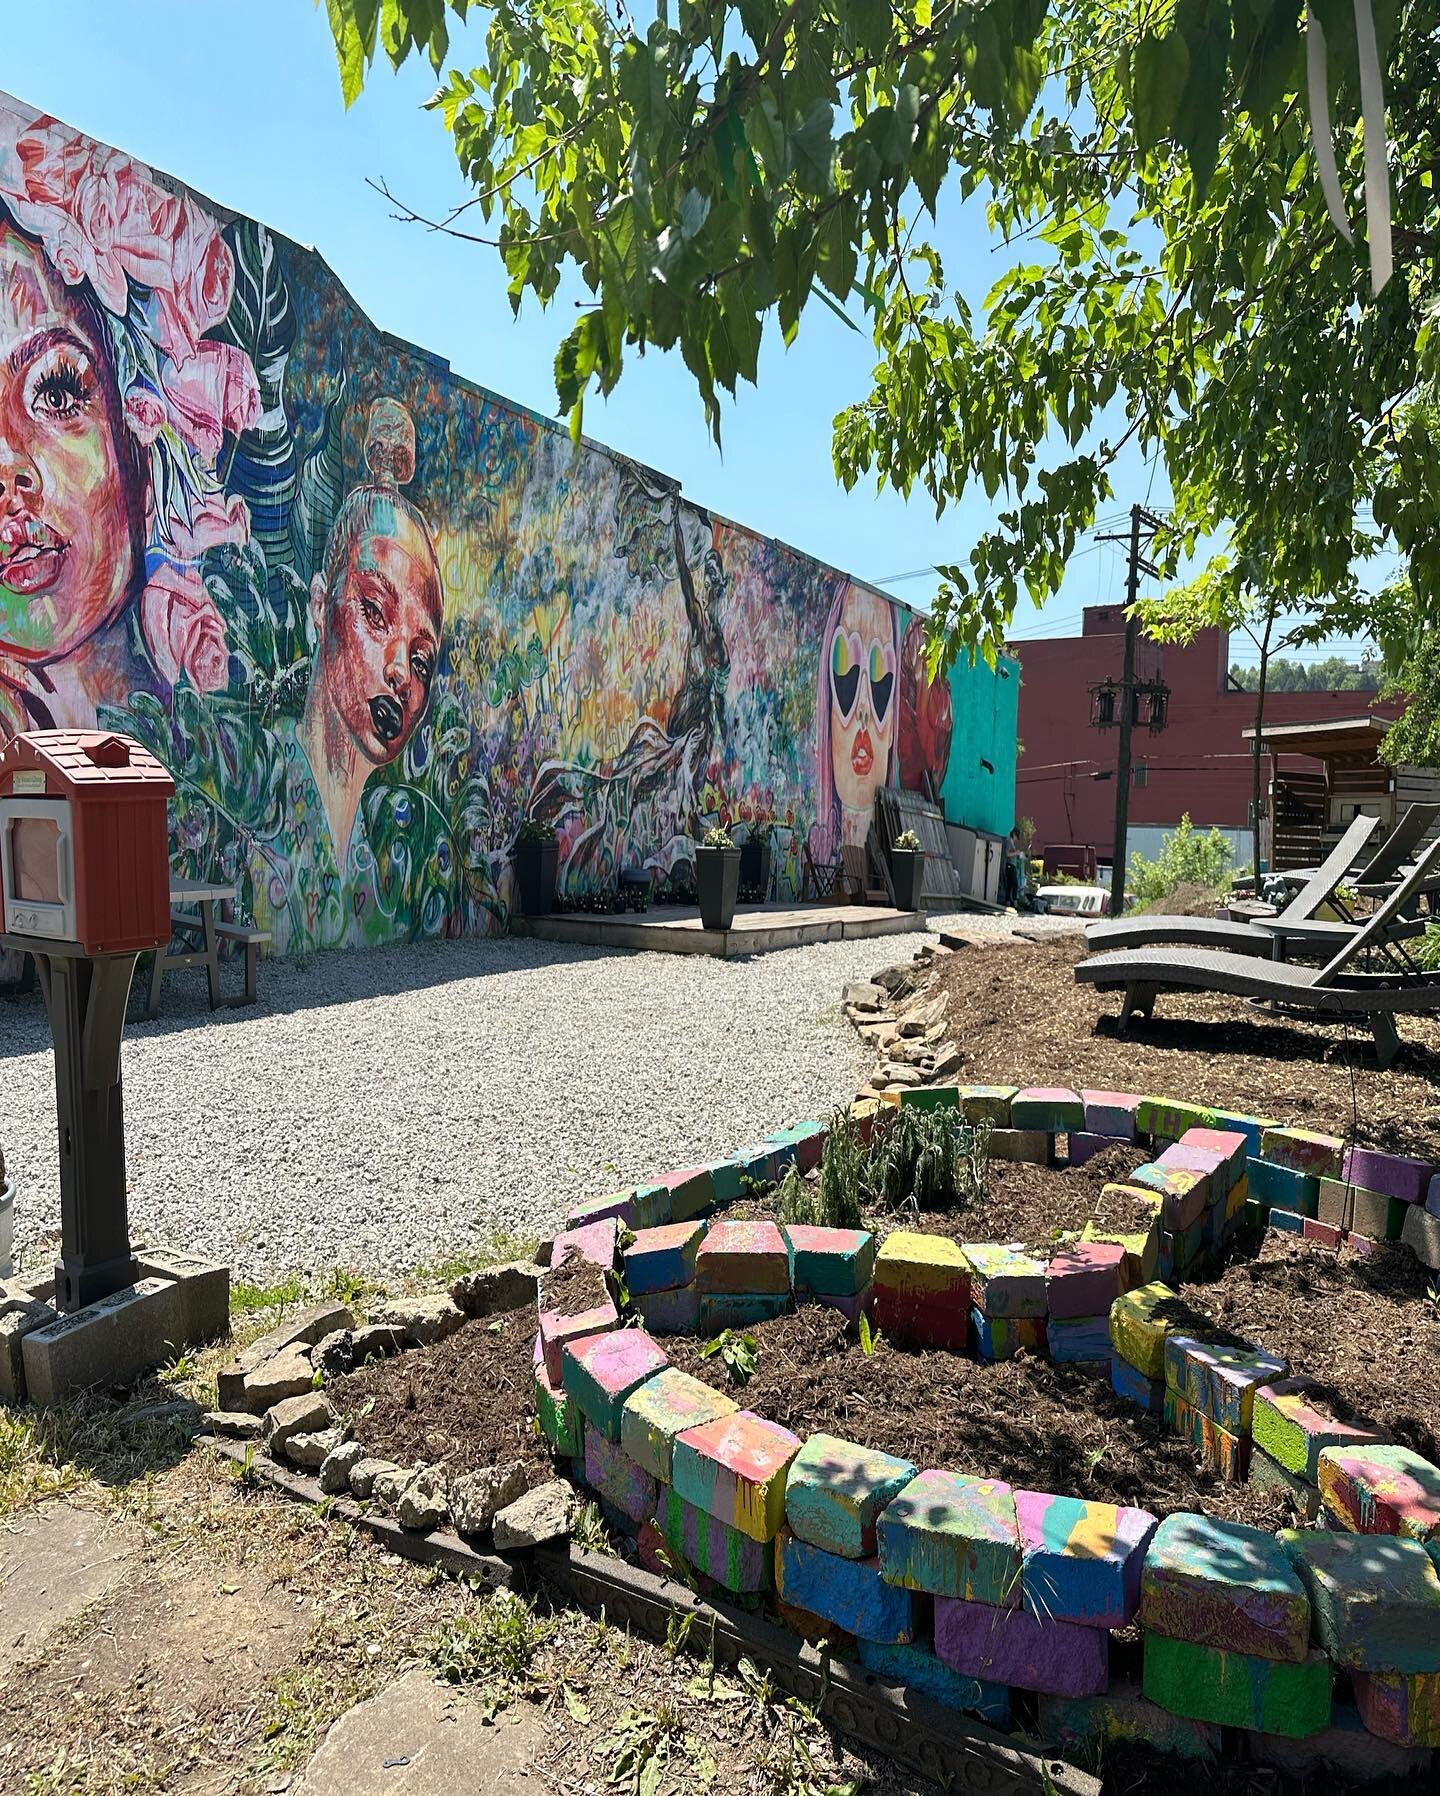 Thanks to an incredible team of volunteers, our gorgeous outdoor spaces are cleaned up and ready for you! These beautiful lots were created with care for you - please come down and enjoy them any time! 910 Braddock Ave. 15104